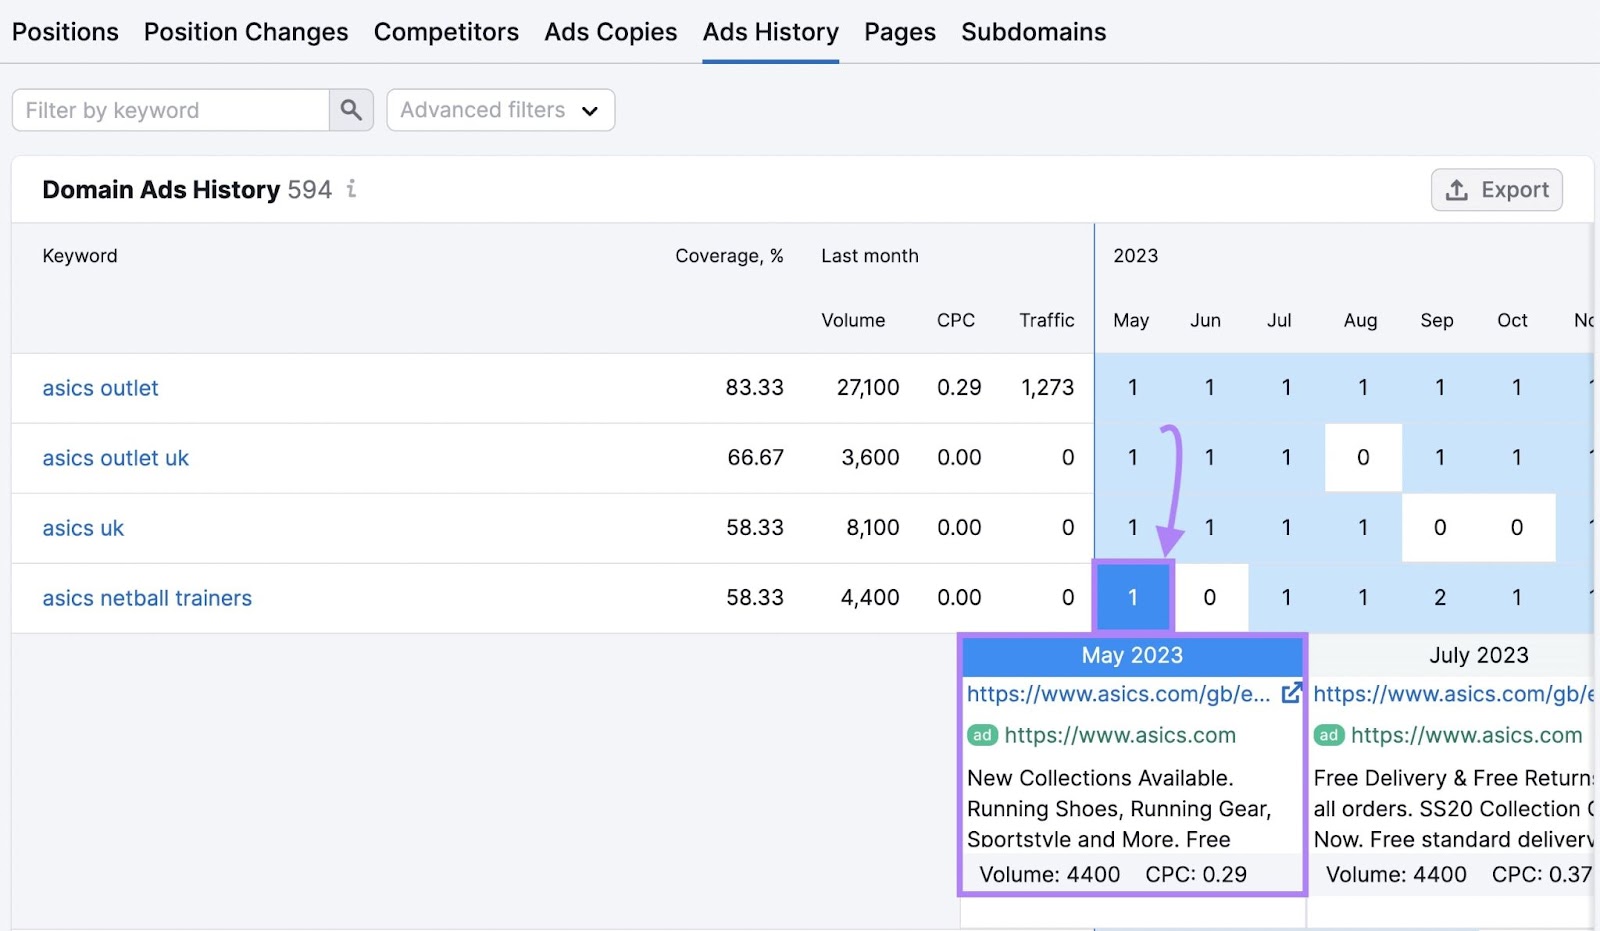 Semrush Advertising Research tool Ads History tab with May 2023 calendar date highlighted and Asics ads copy displayed